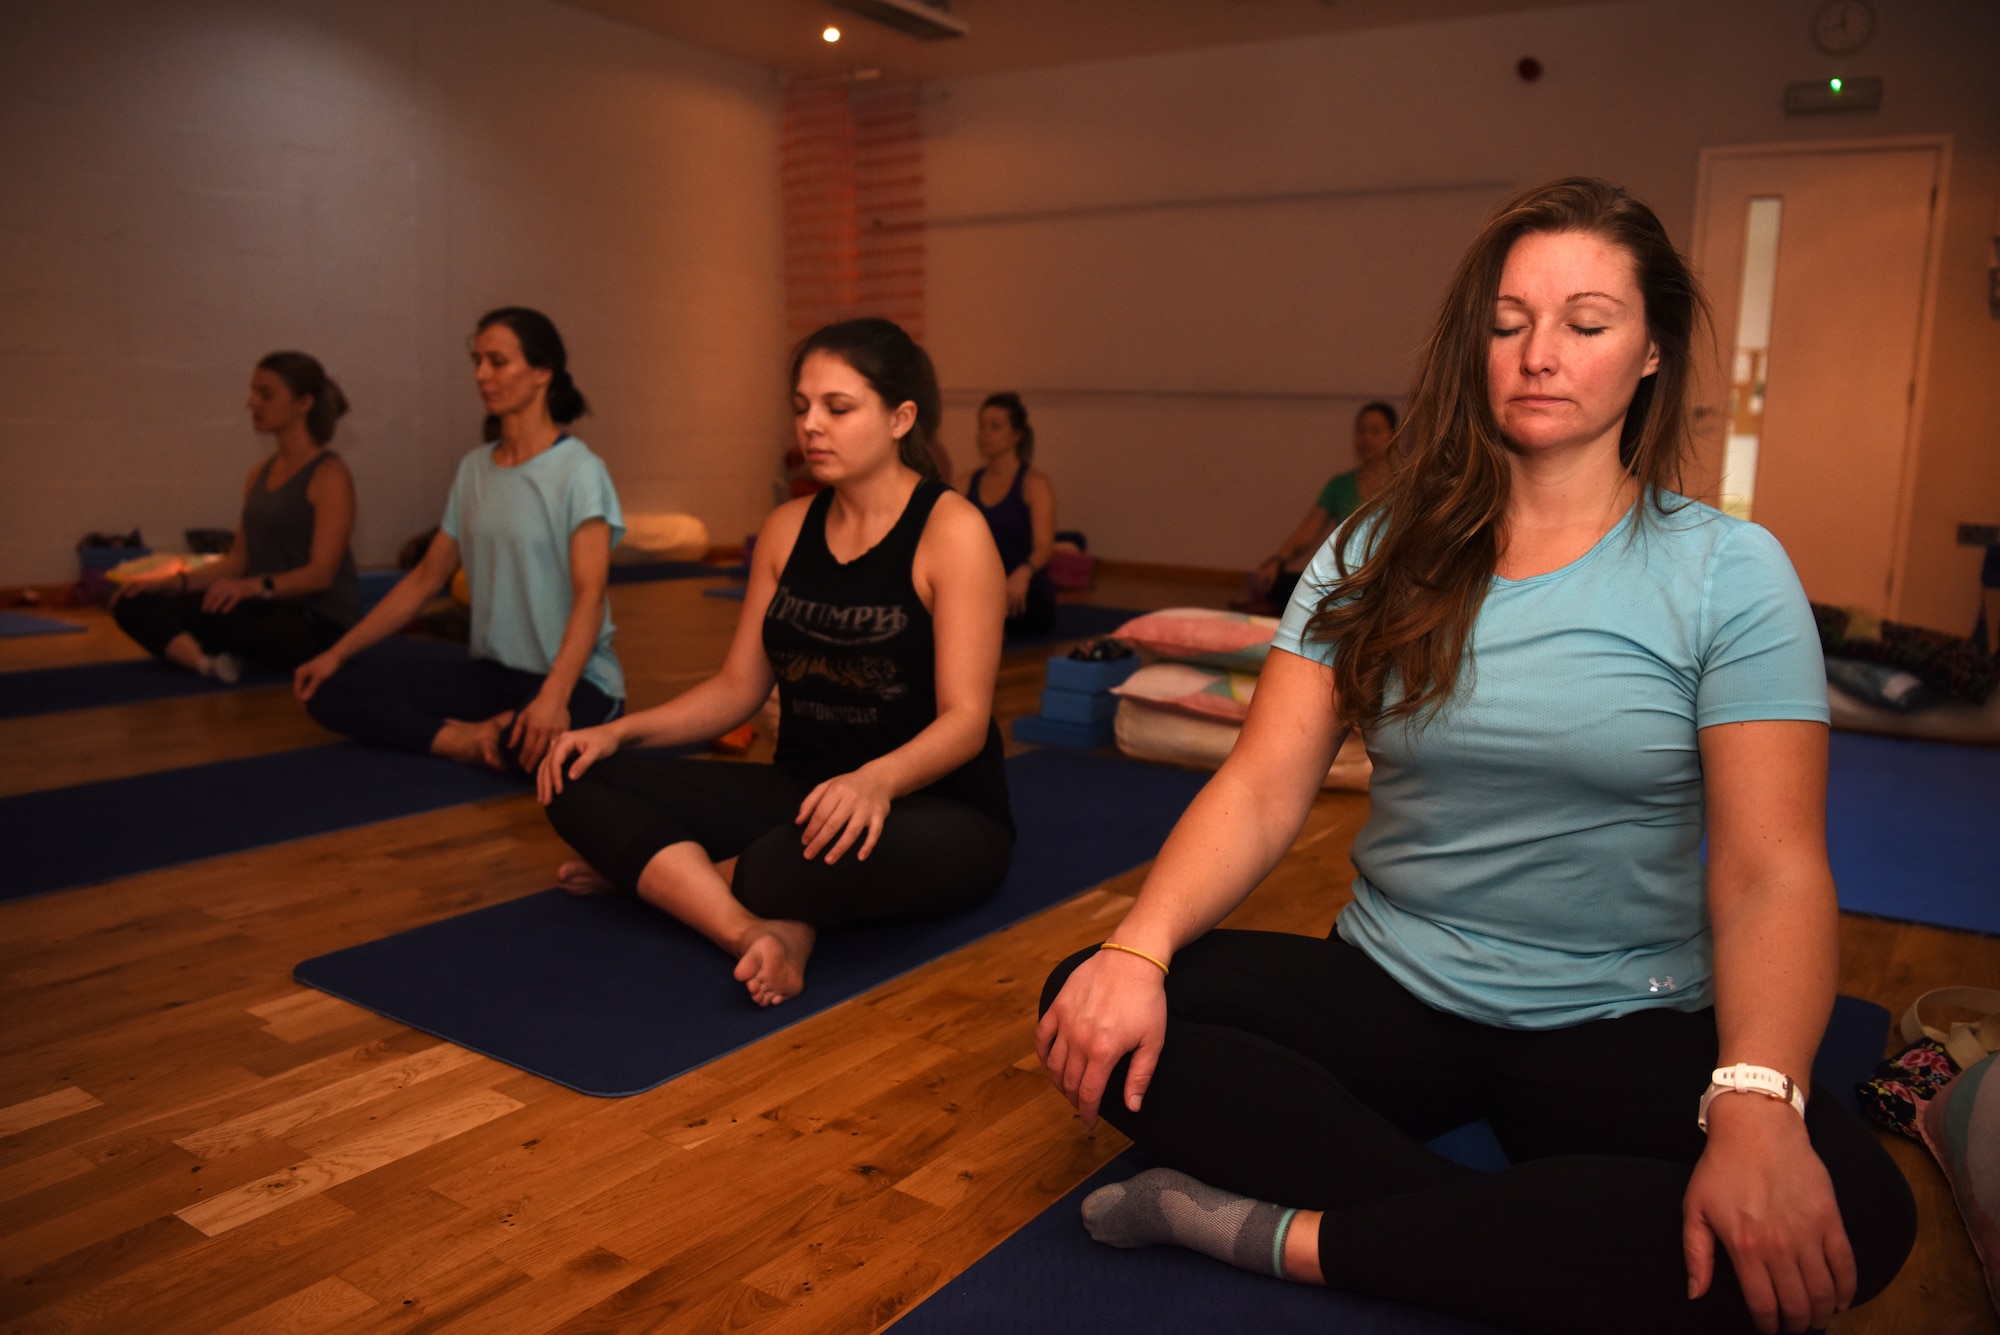 Team Mildenhall spouses take part in a Yin yoga session at a local yoga studio in Newmarket, England, Jan. 10, 2019. The yoga session was part of a Resiliency and Mindfulness Event hosted by Jack Sweet, RAF Mildenhall Community Support Coordinator, and RAFM Key Spouses organization. (U.S. Air Force photo by Airman 1st Class Brandon Esau)